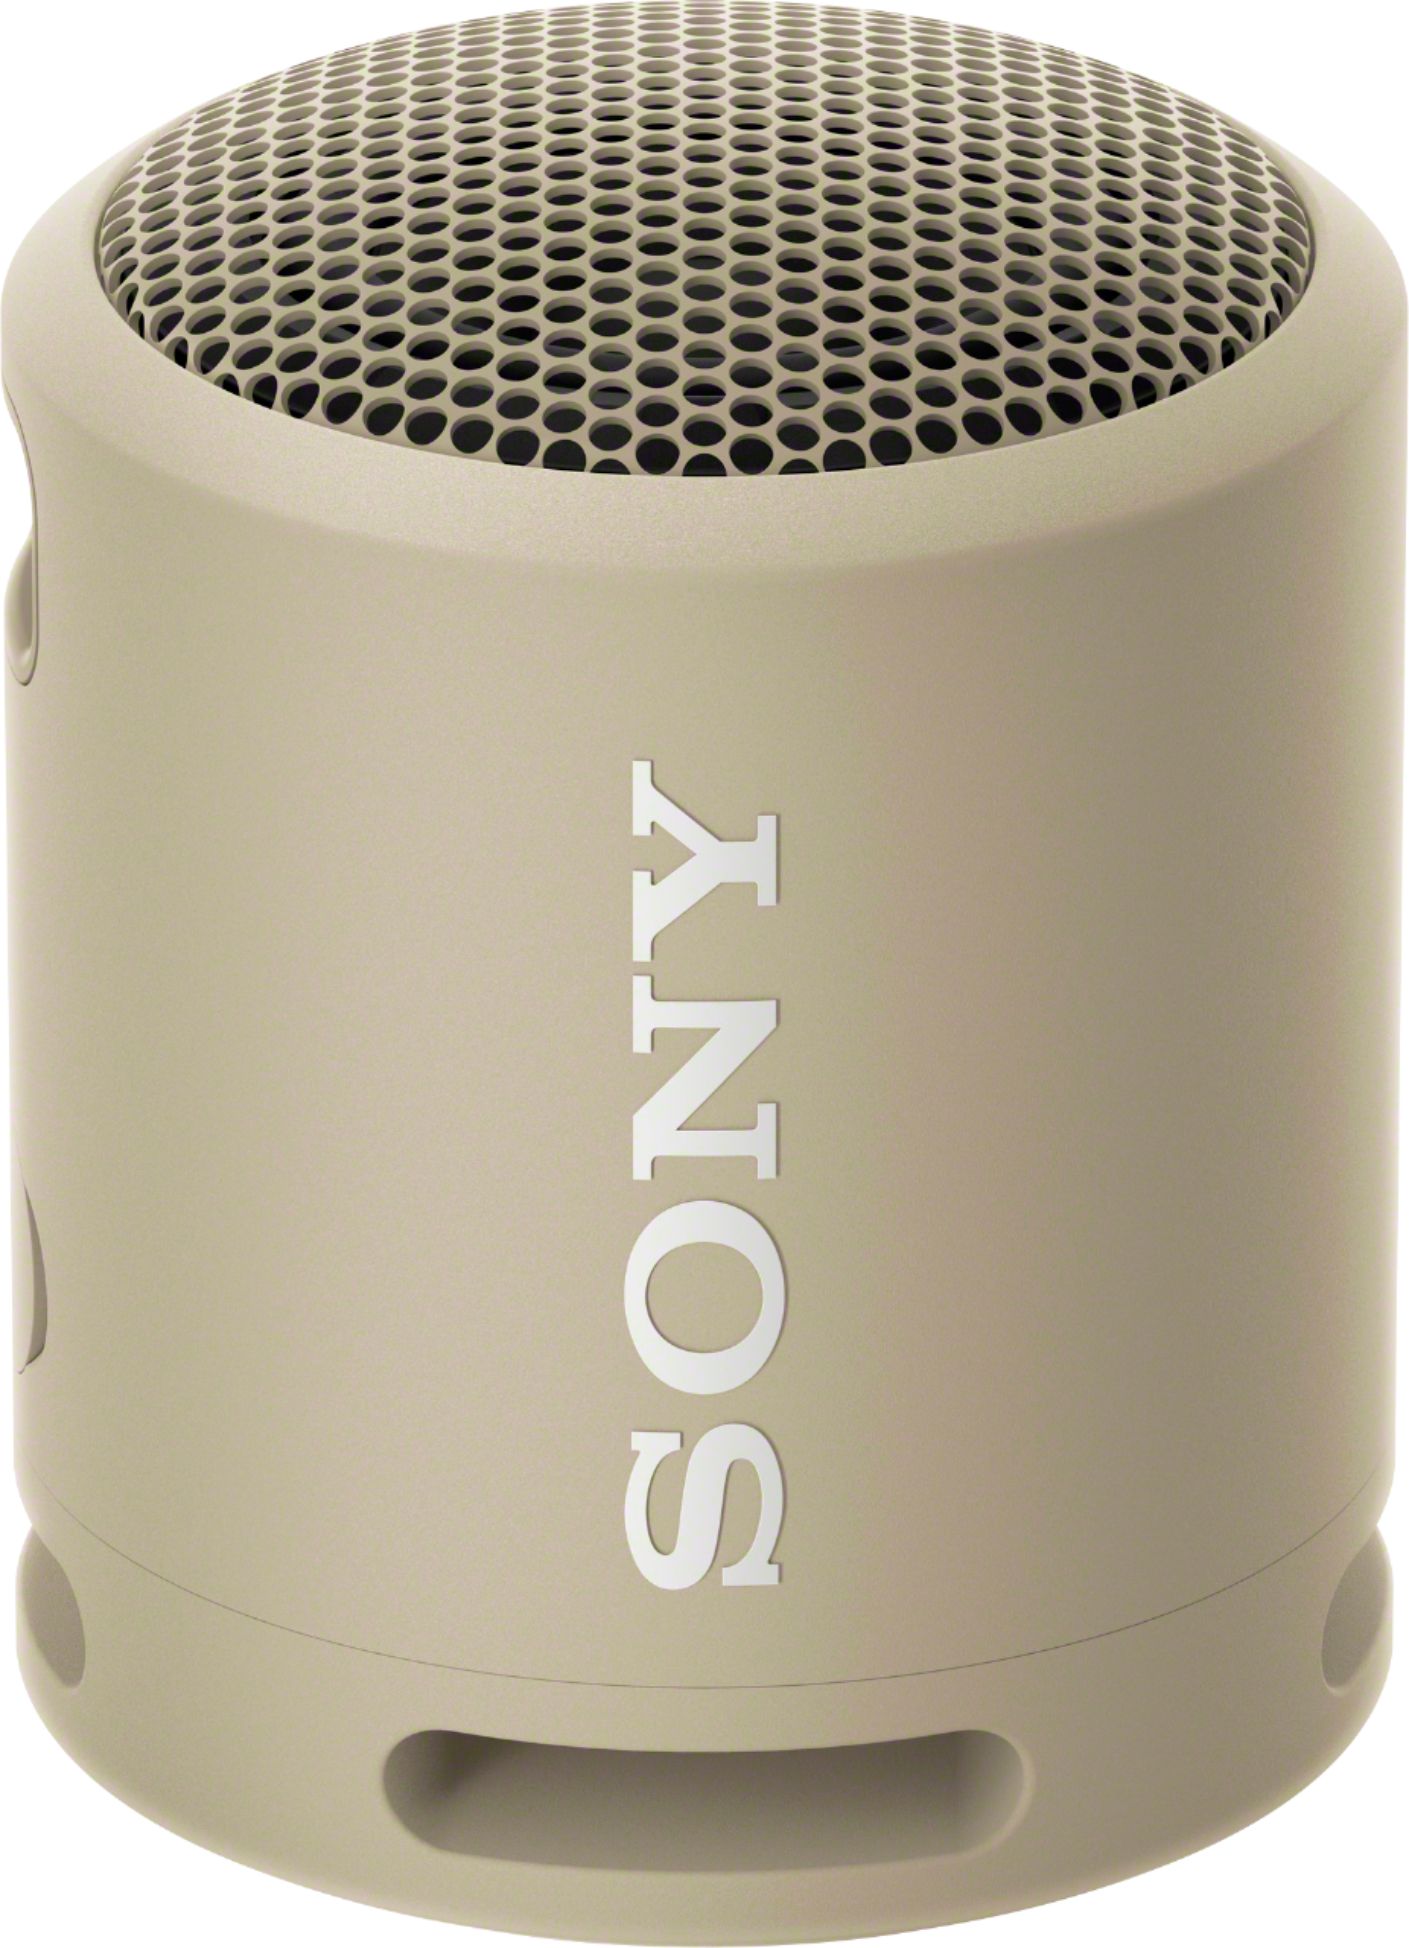 Best BASS Buy: Bluetooth Portable Speaker SRSXB13/C Sony EXTRA Taupe Compact